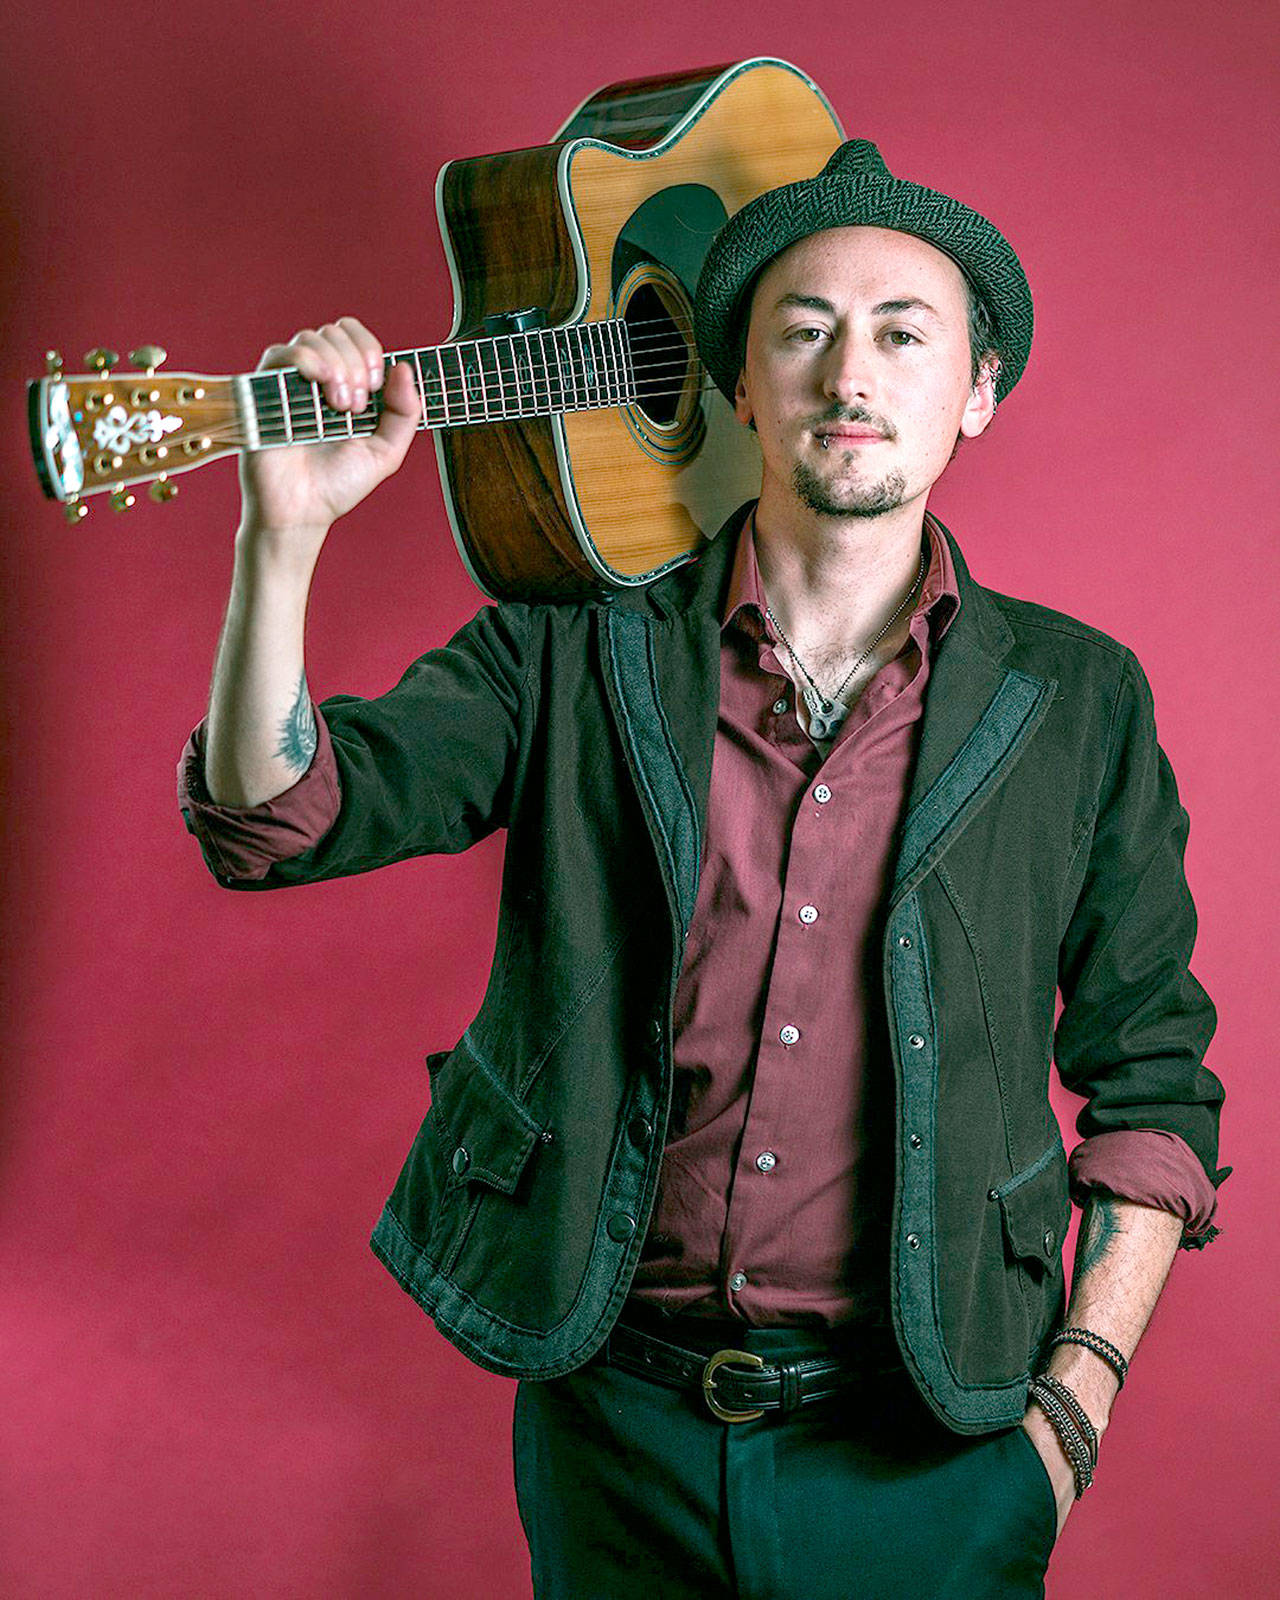 Singer-songwriter Jesse Strickman will perform in Coyle on Saturday.